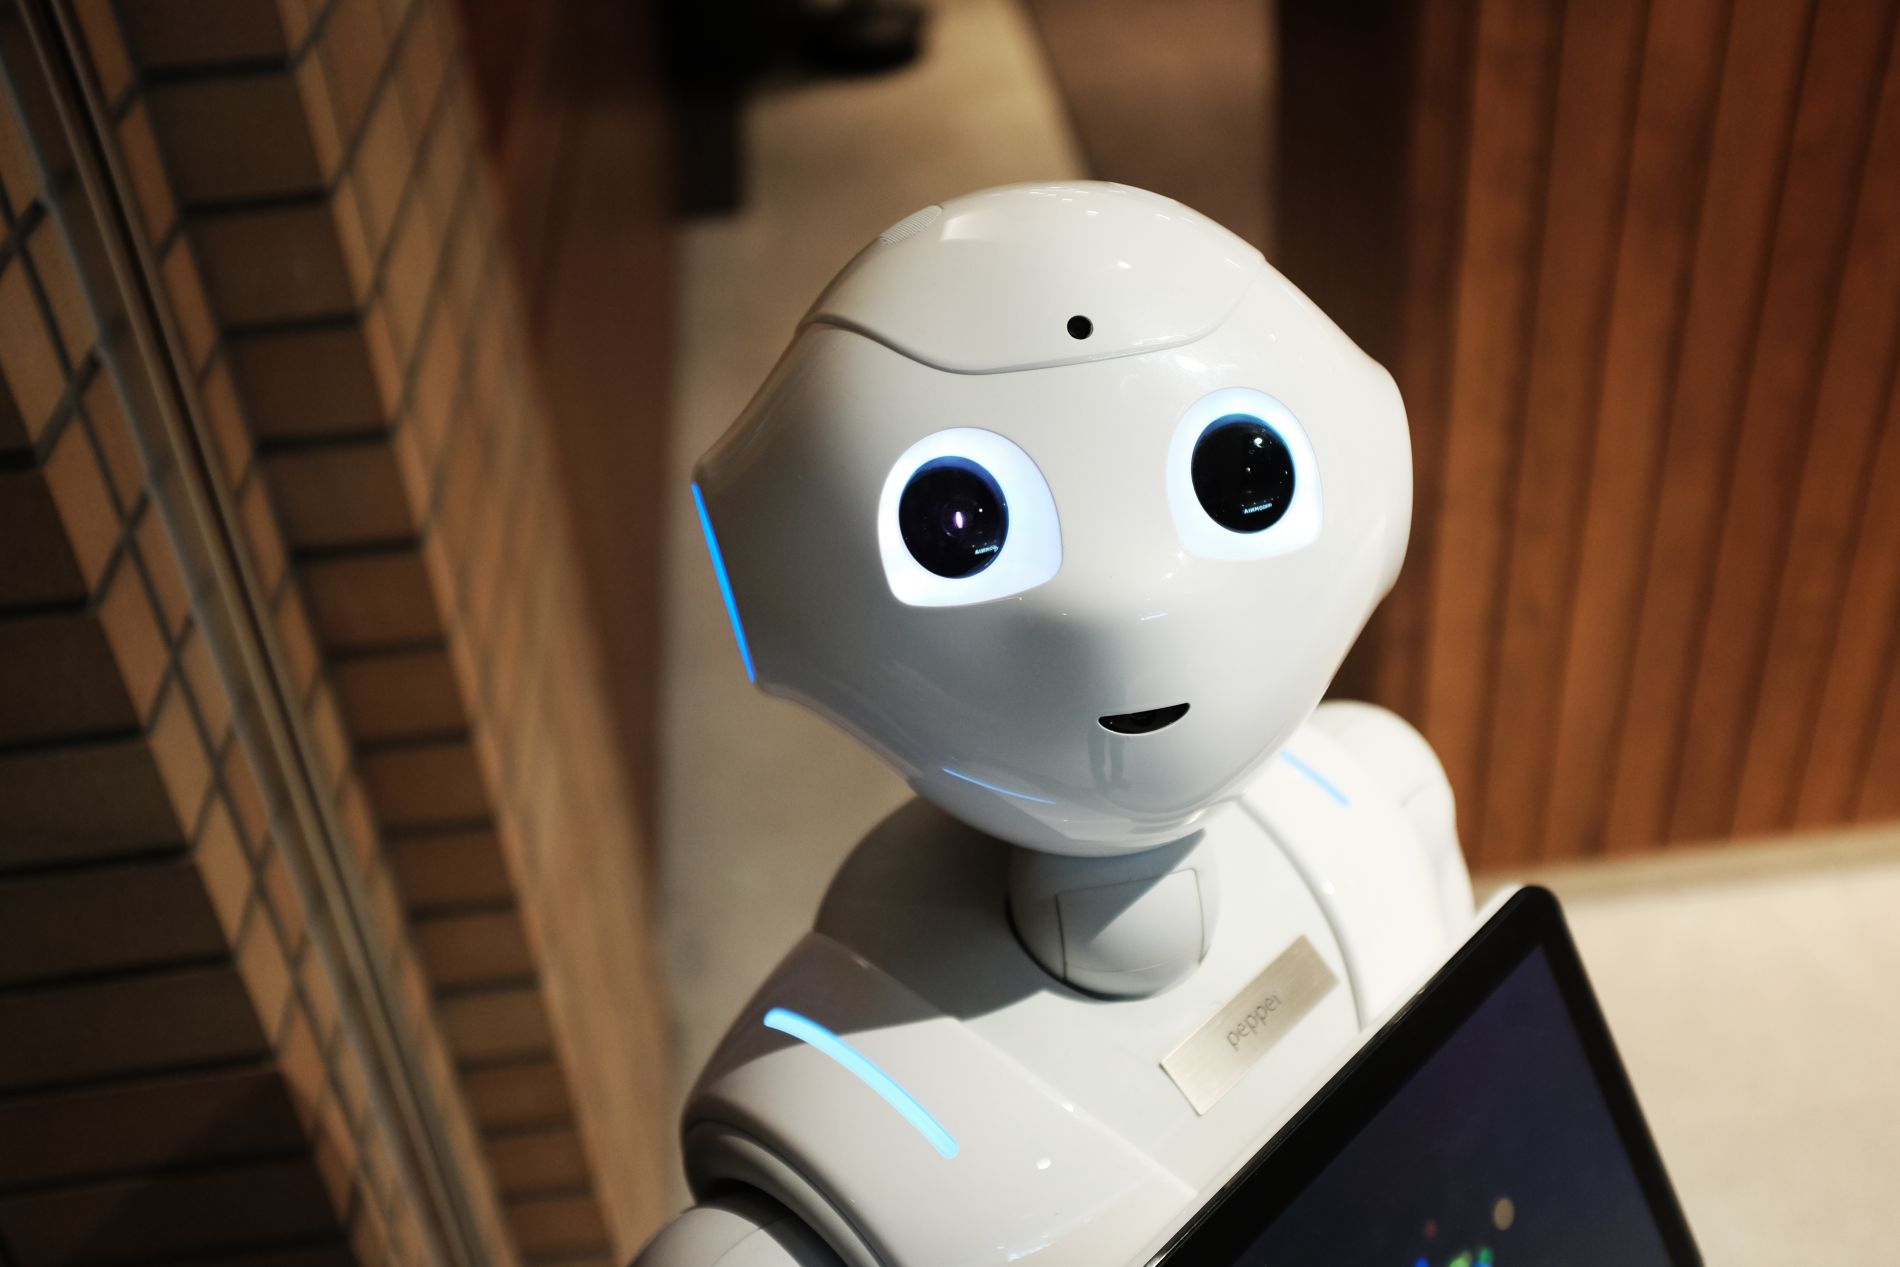 A creepy white robot called Pepper looks directly at the camera